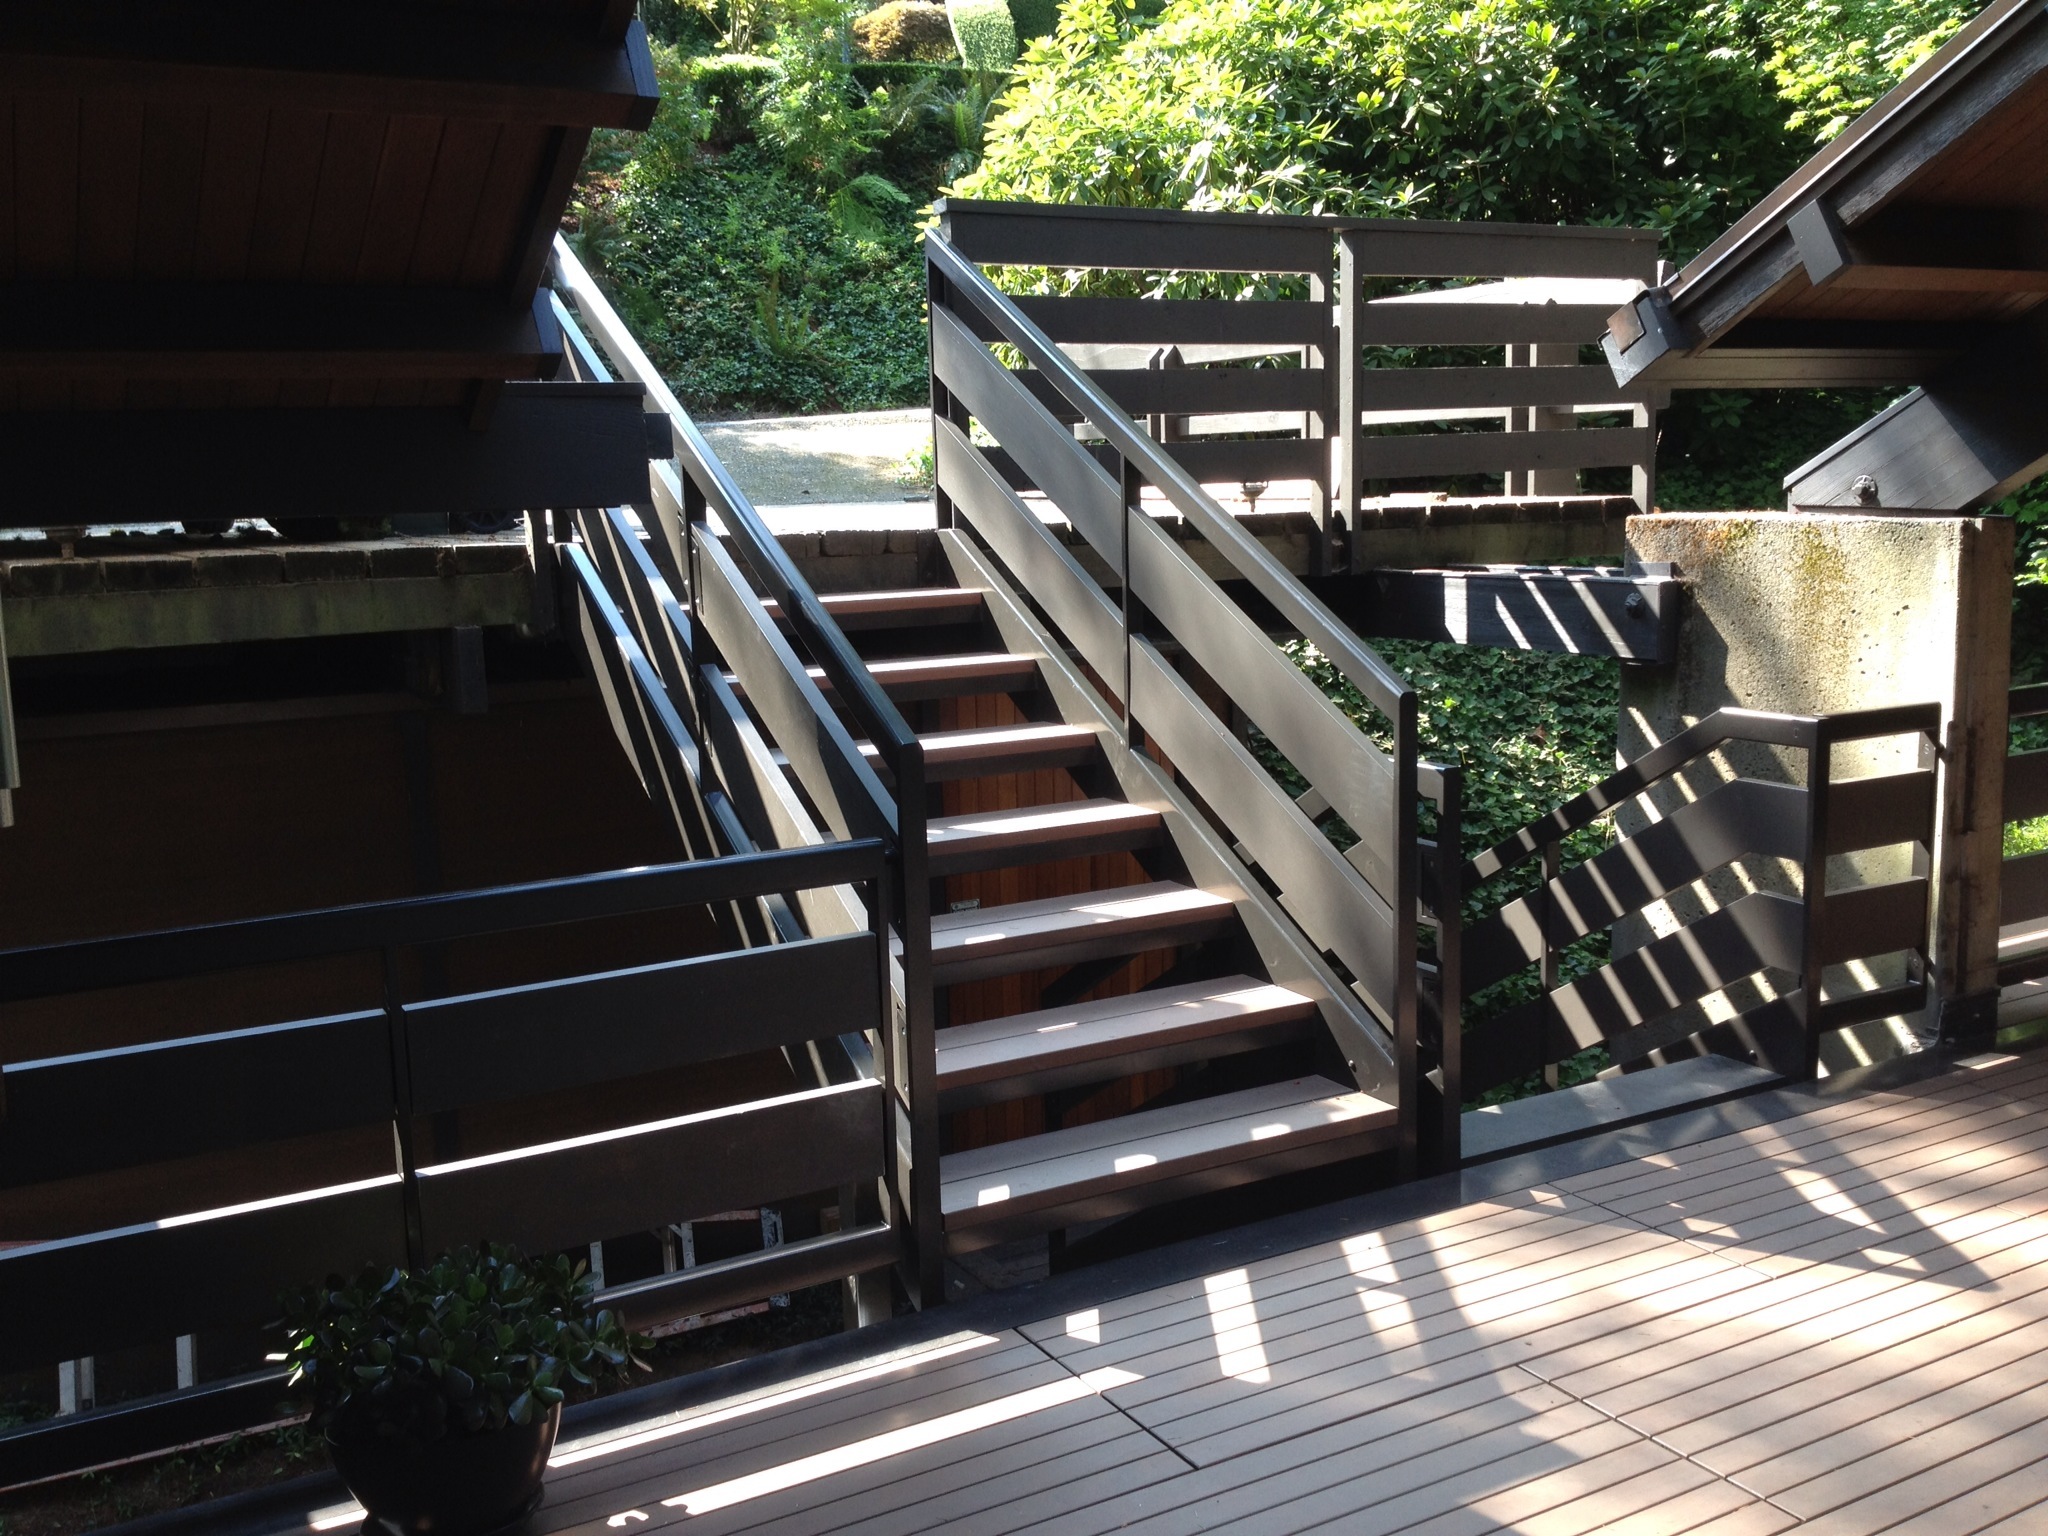  Staircase and railing out of painted steel. Railing continued around the entire deck with wood infill.&nbsp;  Designed by Paul McKean Architects 